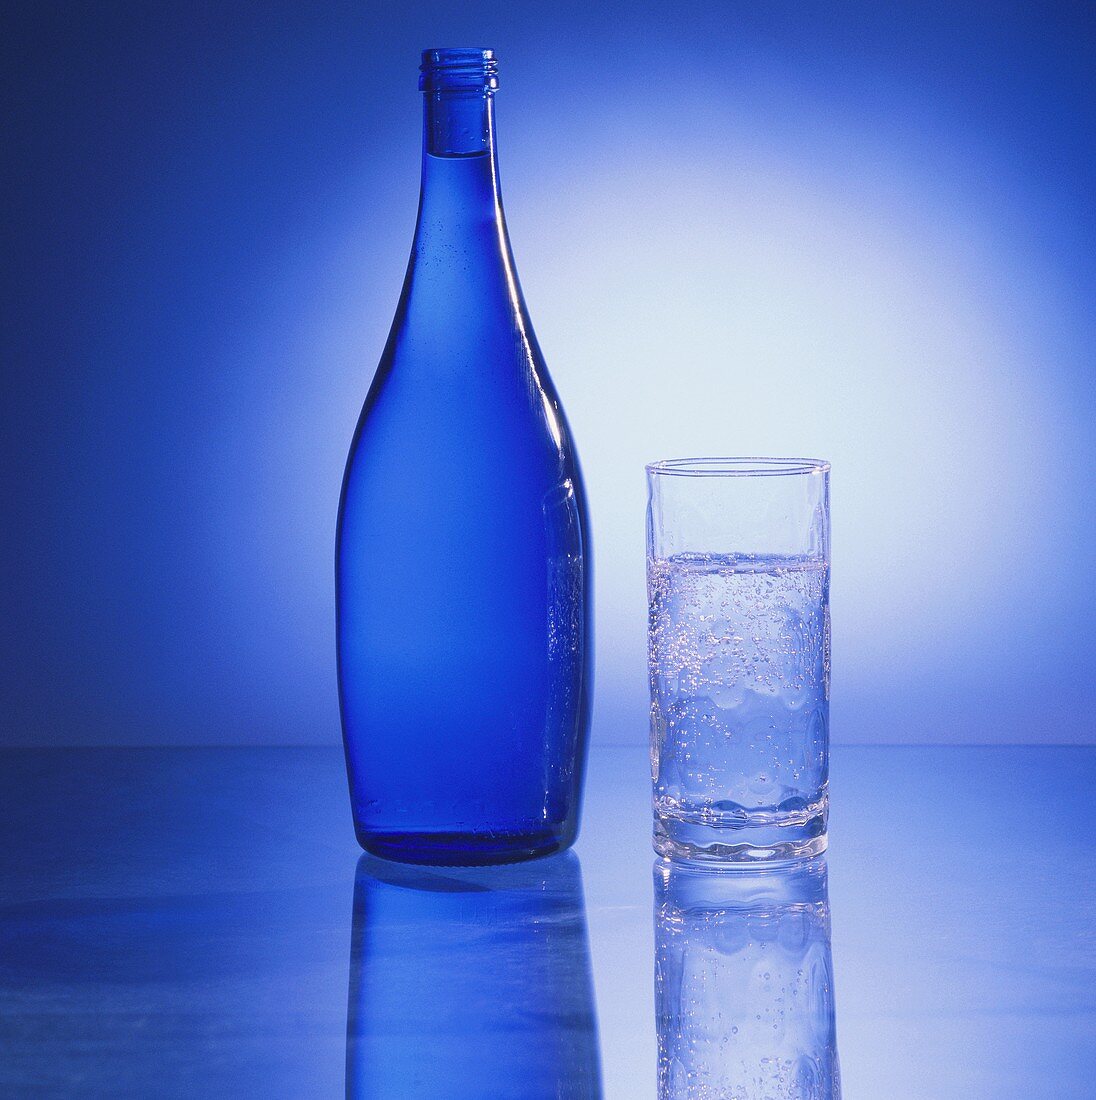 Glass of Mineral Water with Blue Bottle